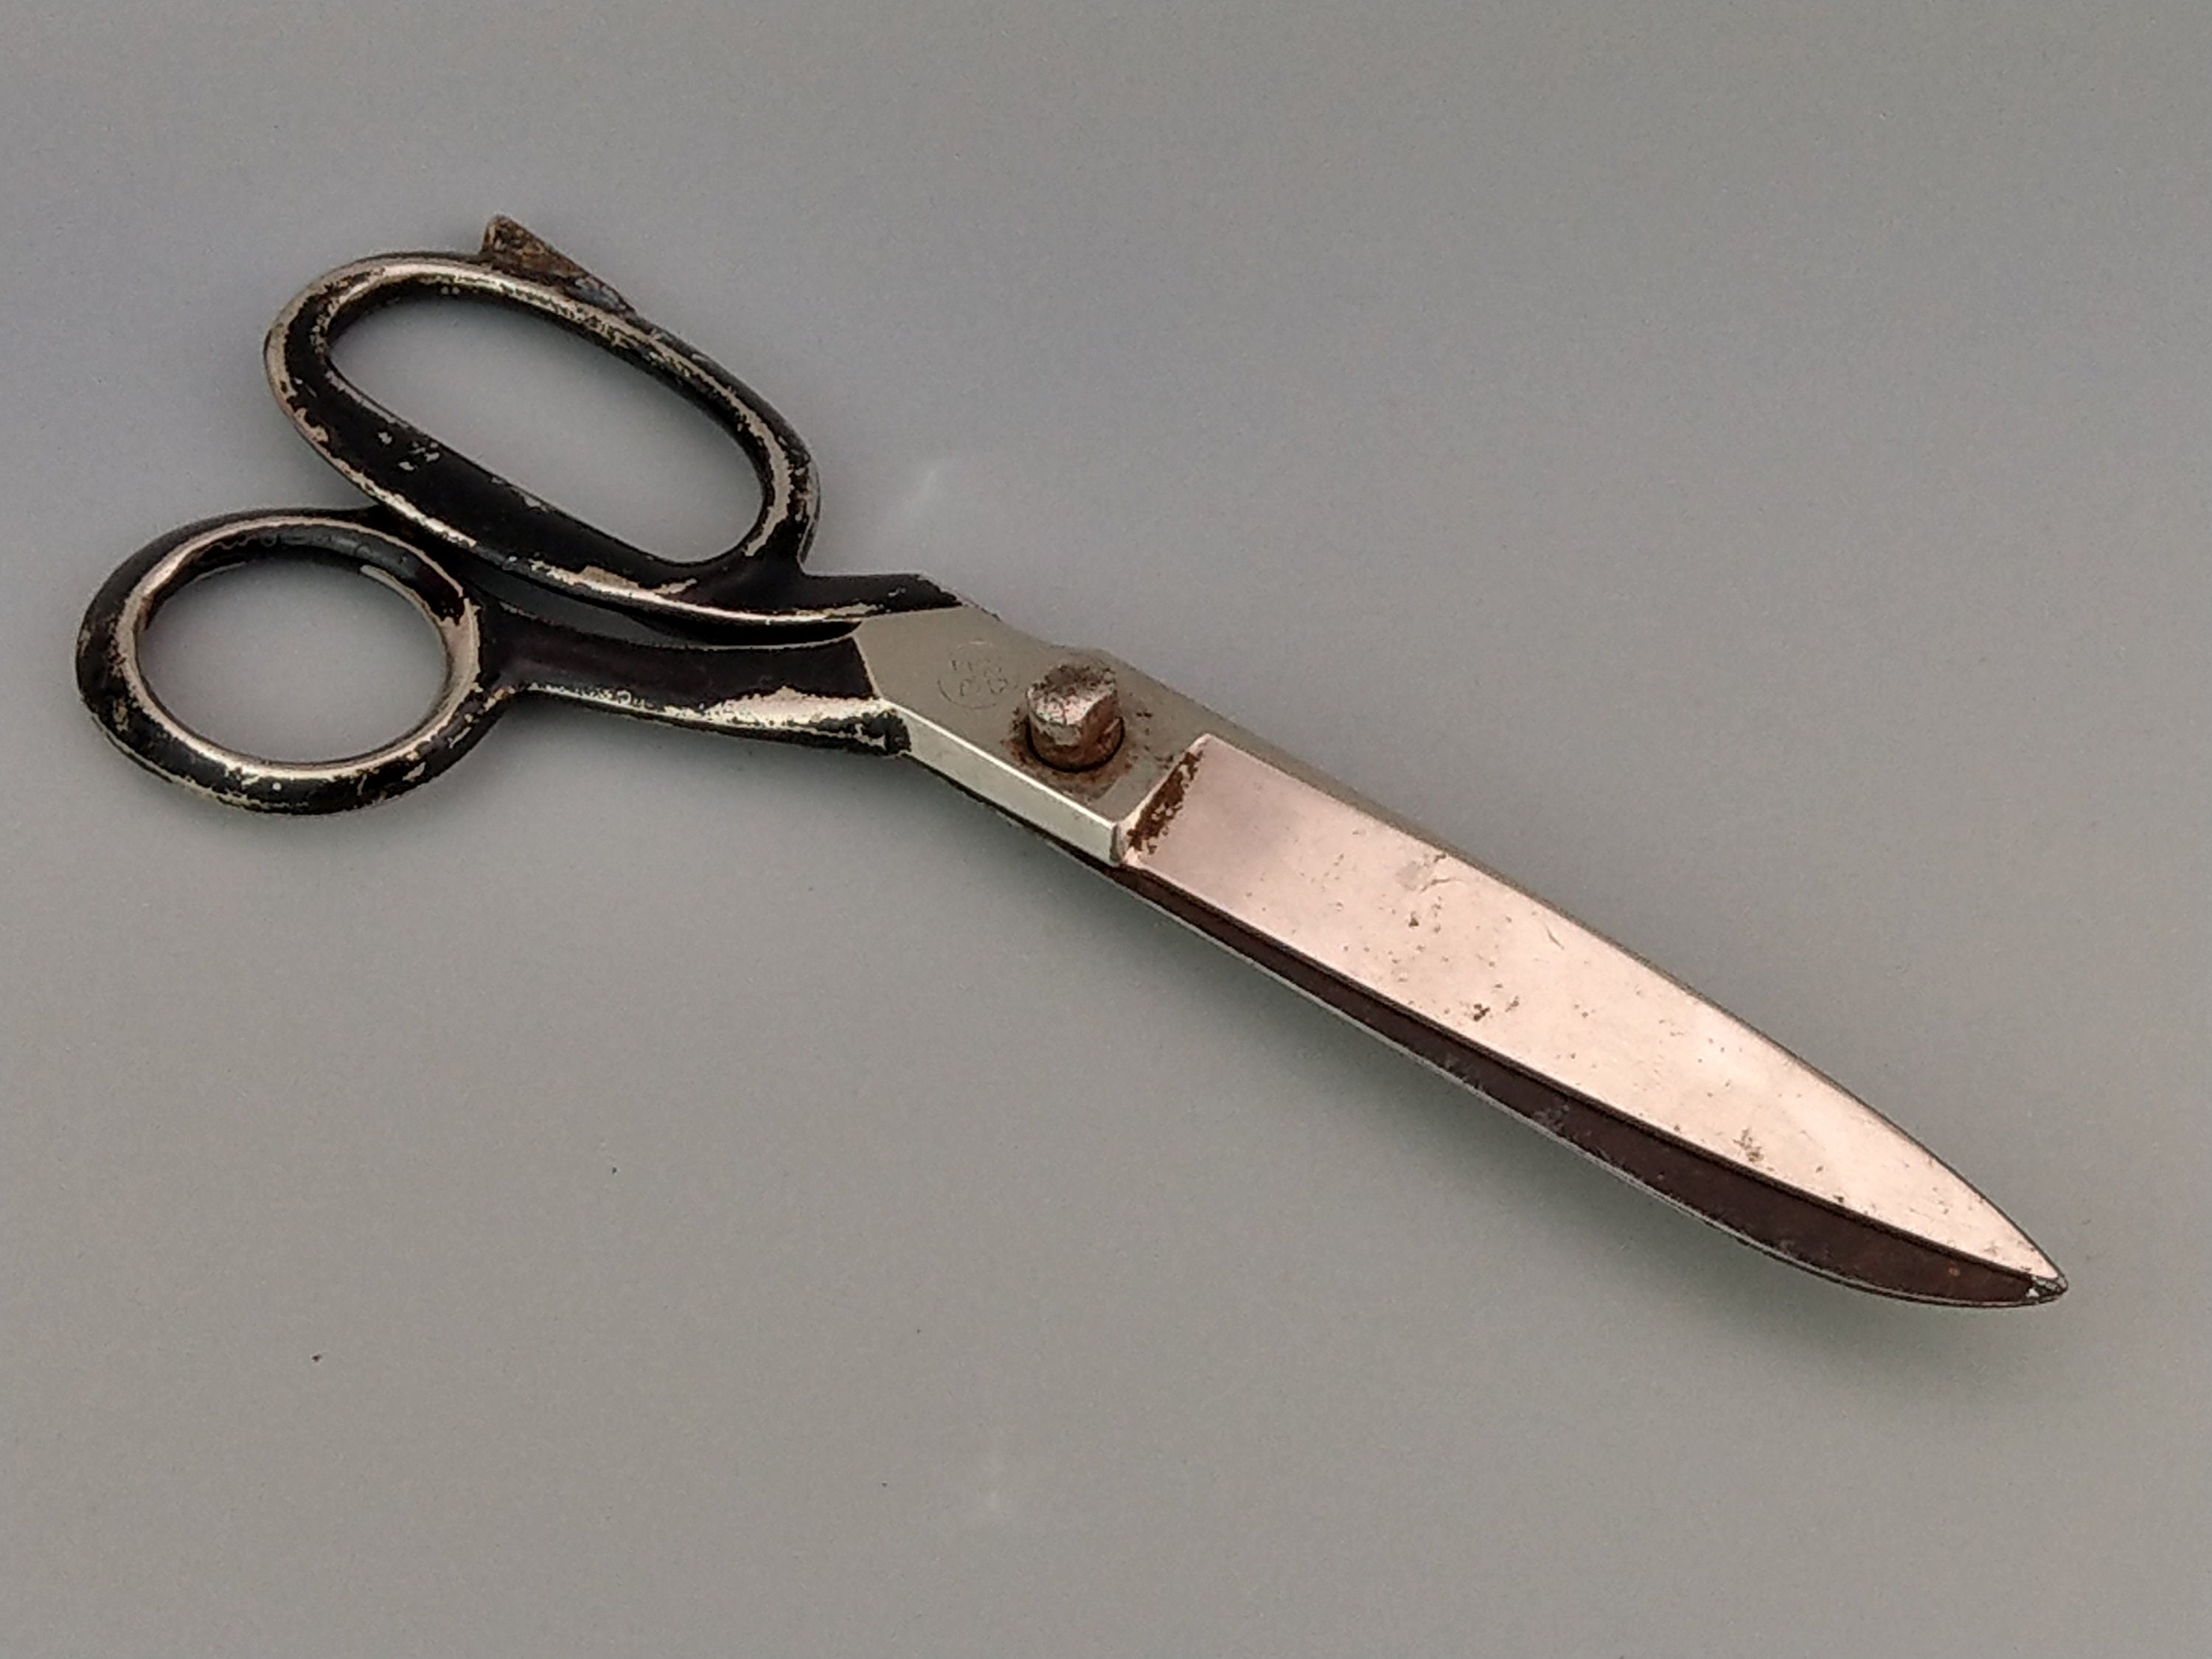 Large Pair of Very Old Seamstress Scissors, Large Scissors Shabby